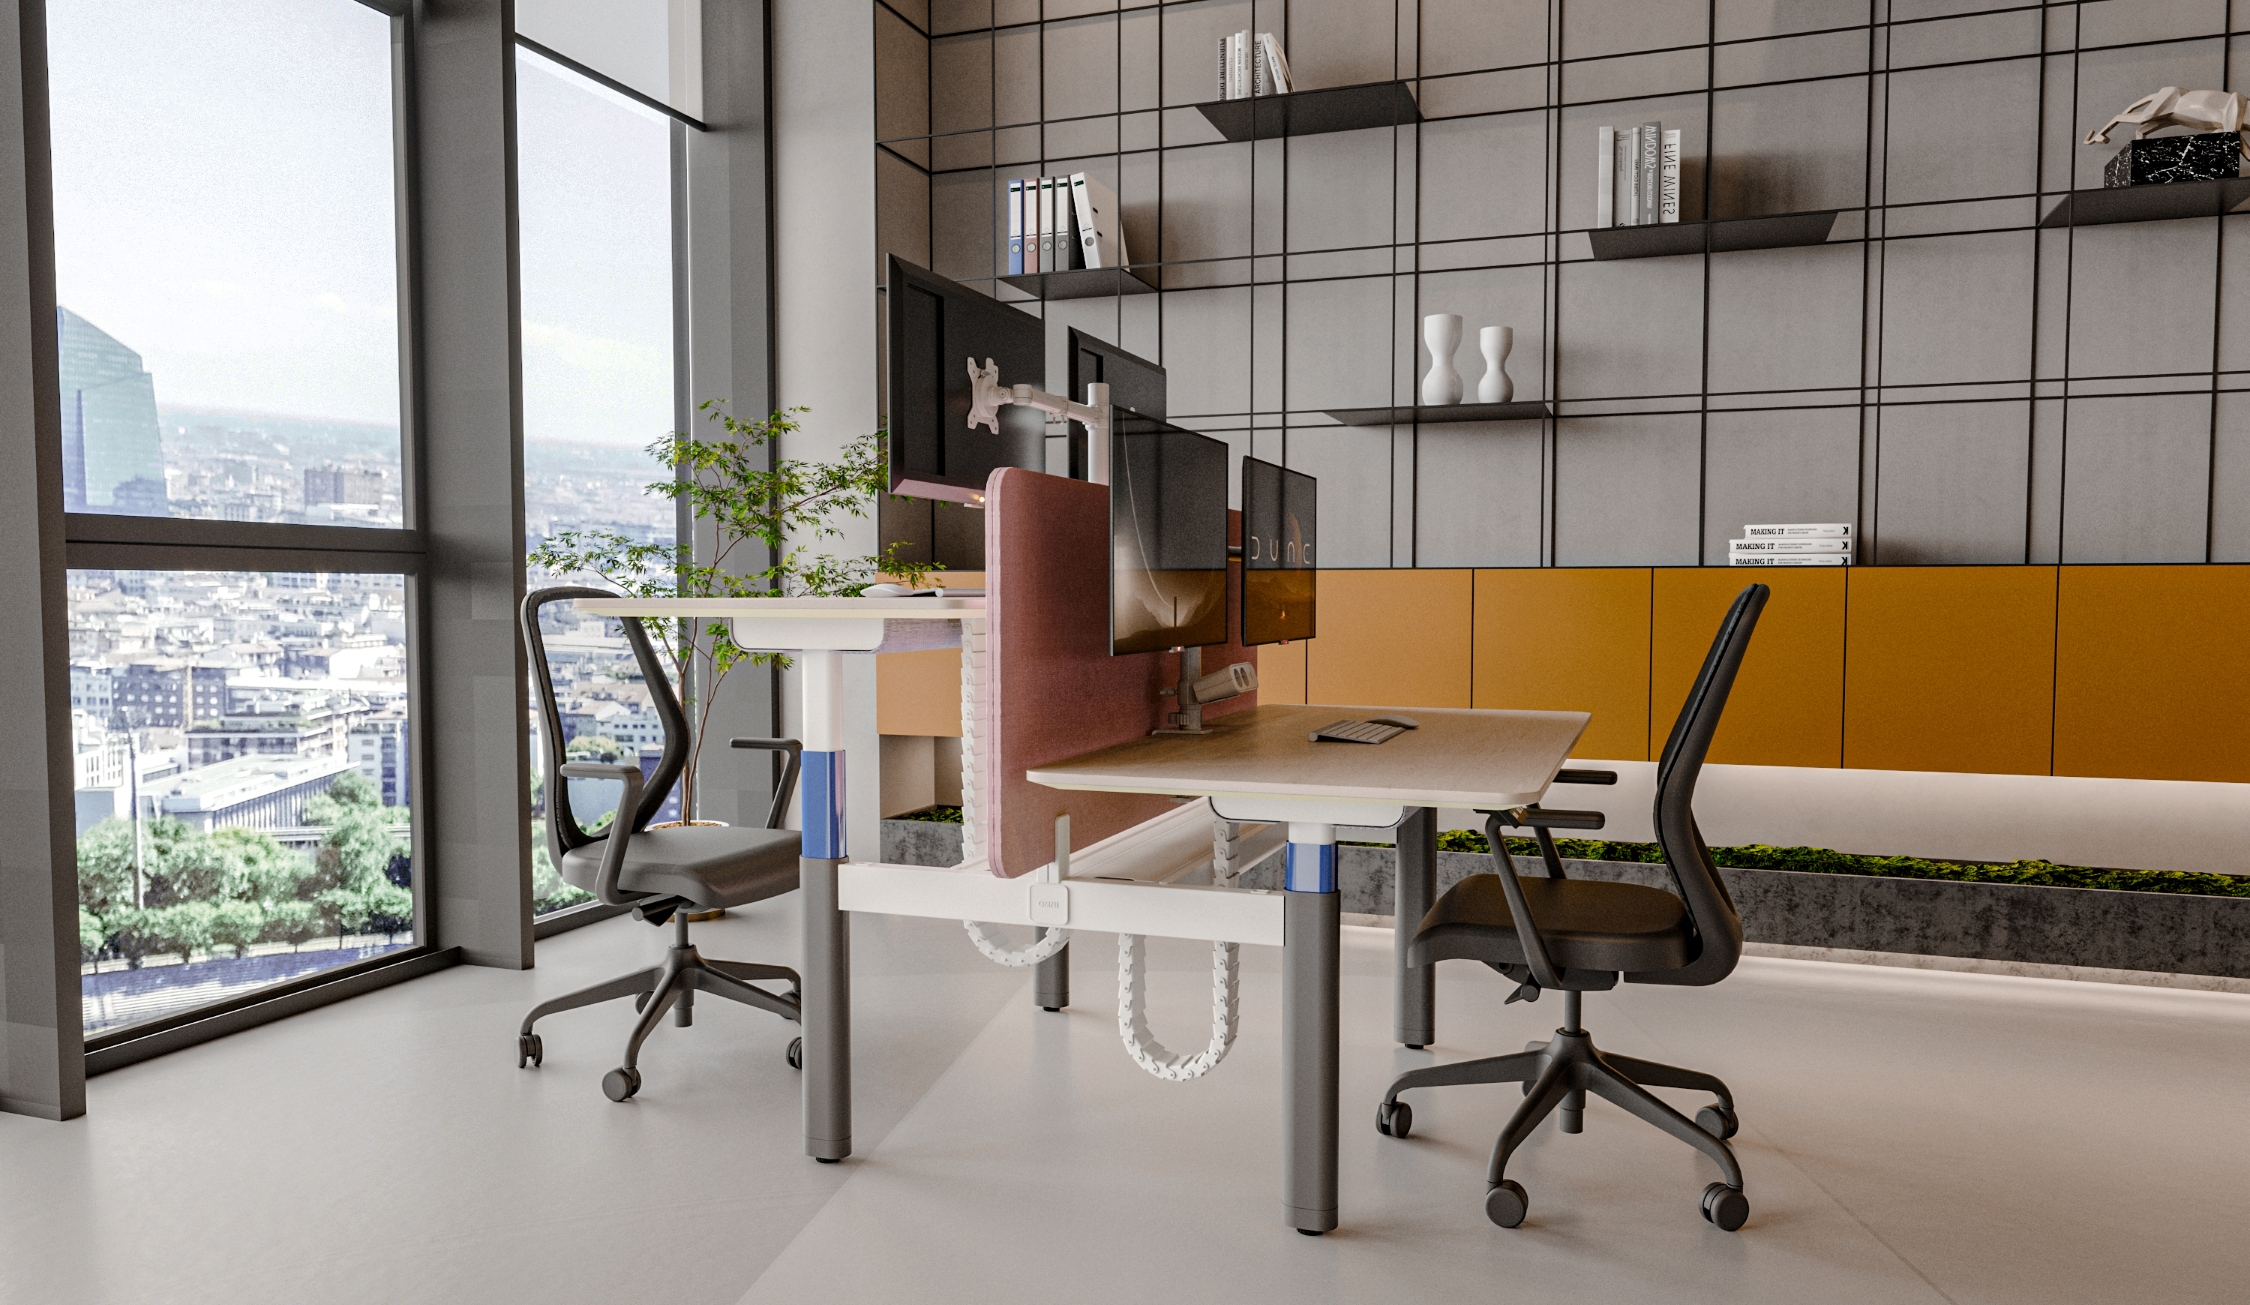 What Are The Health Benefits of Using A Height Adjustable Table in The Office?